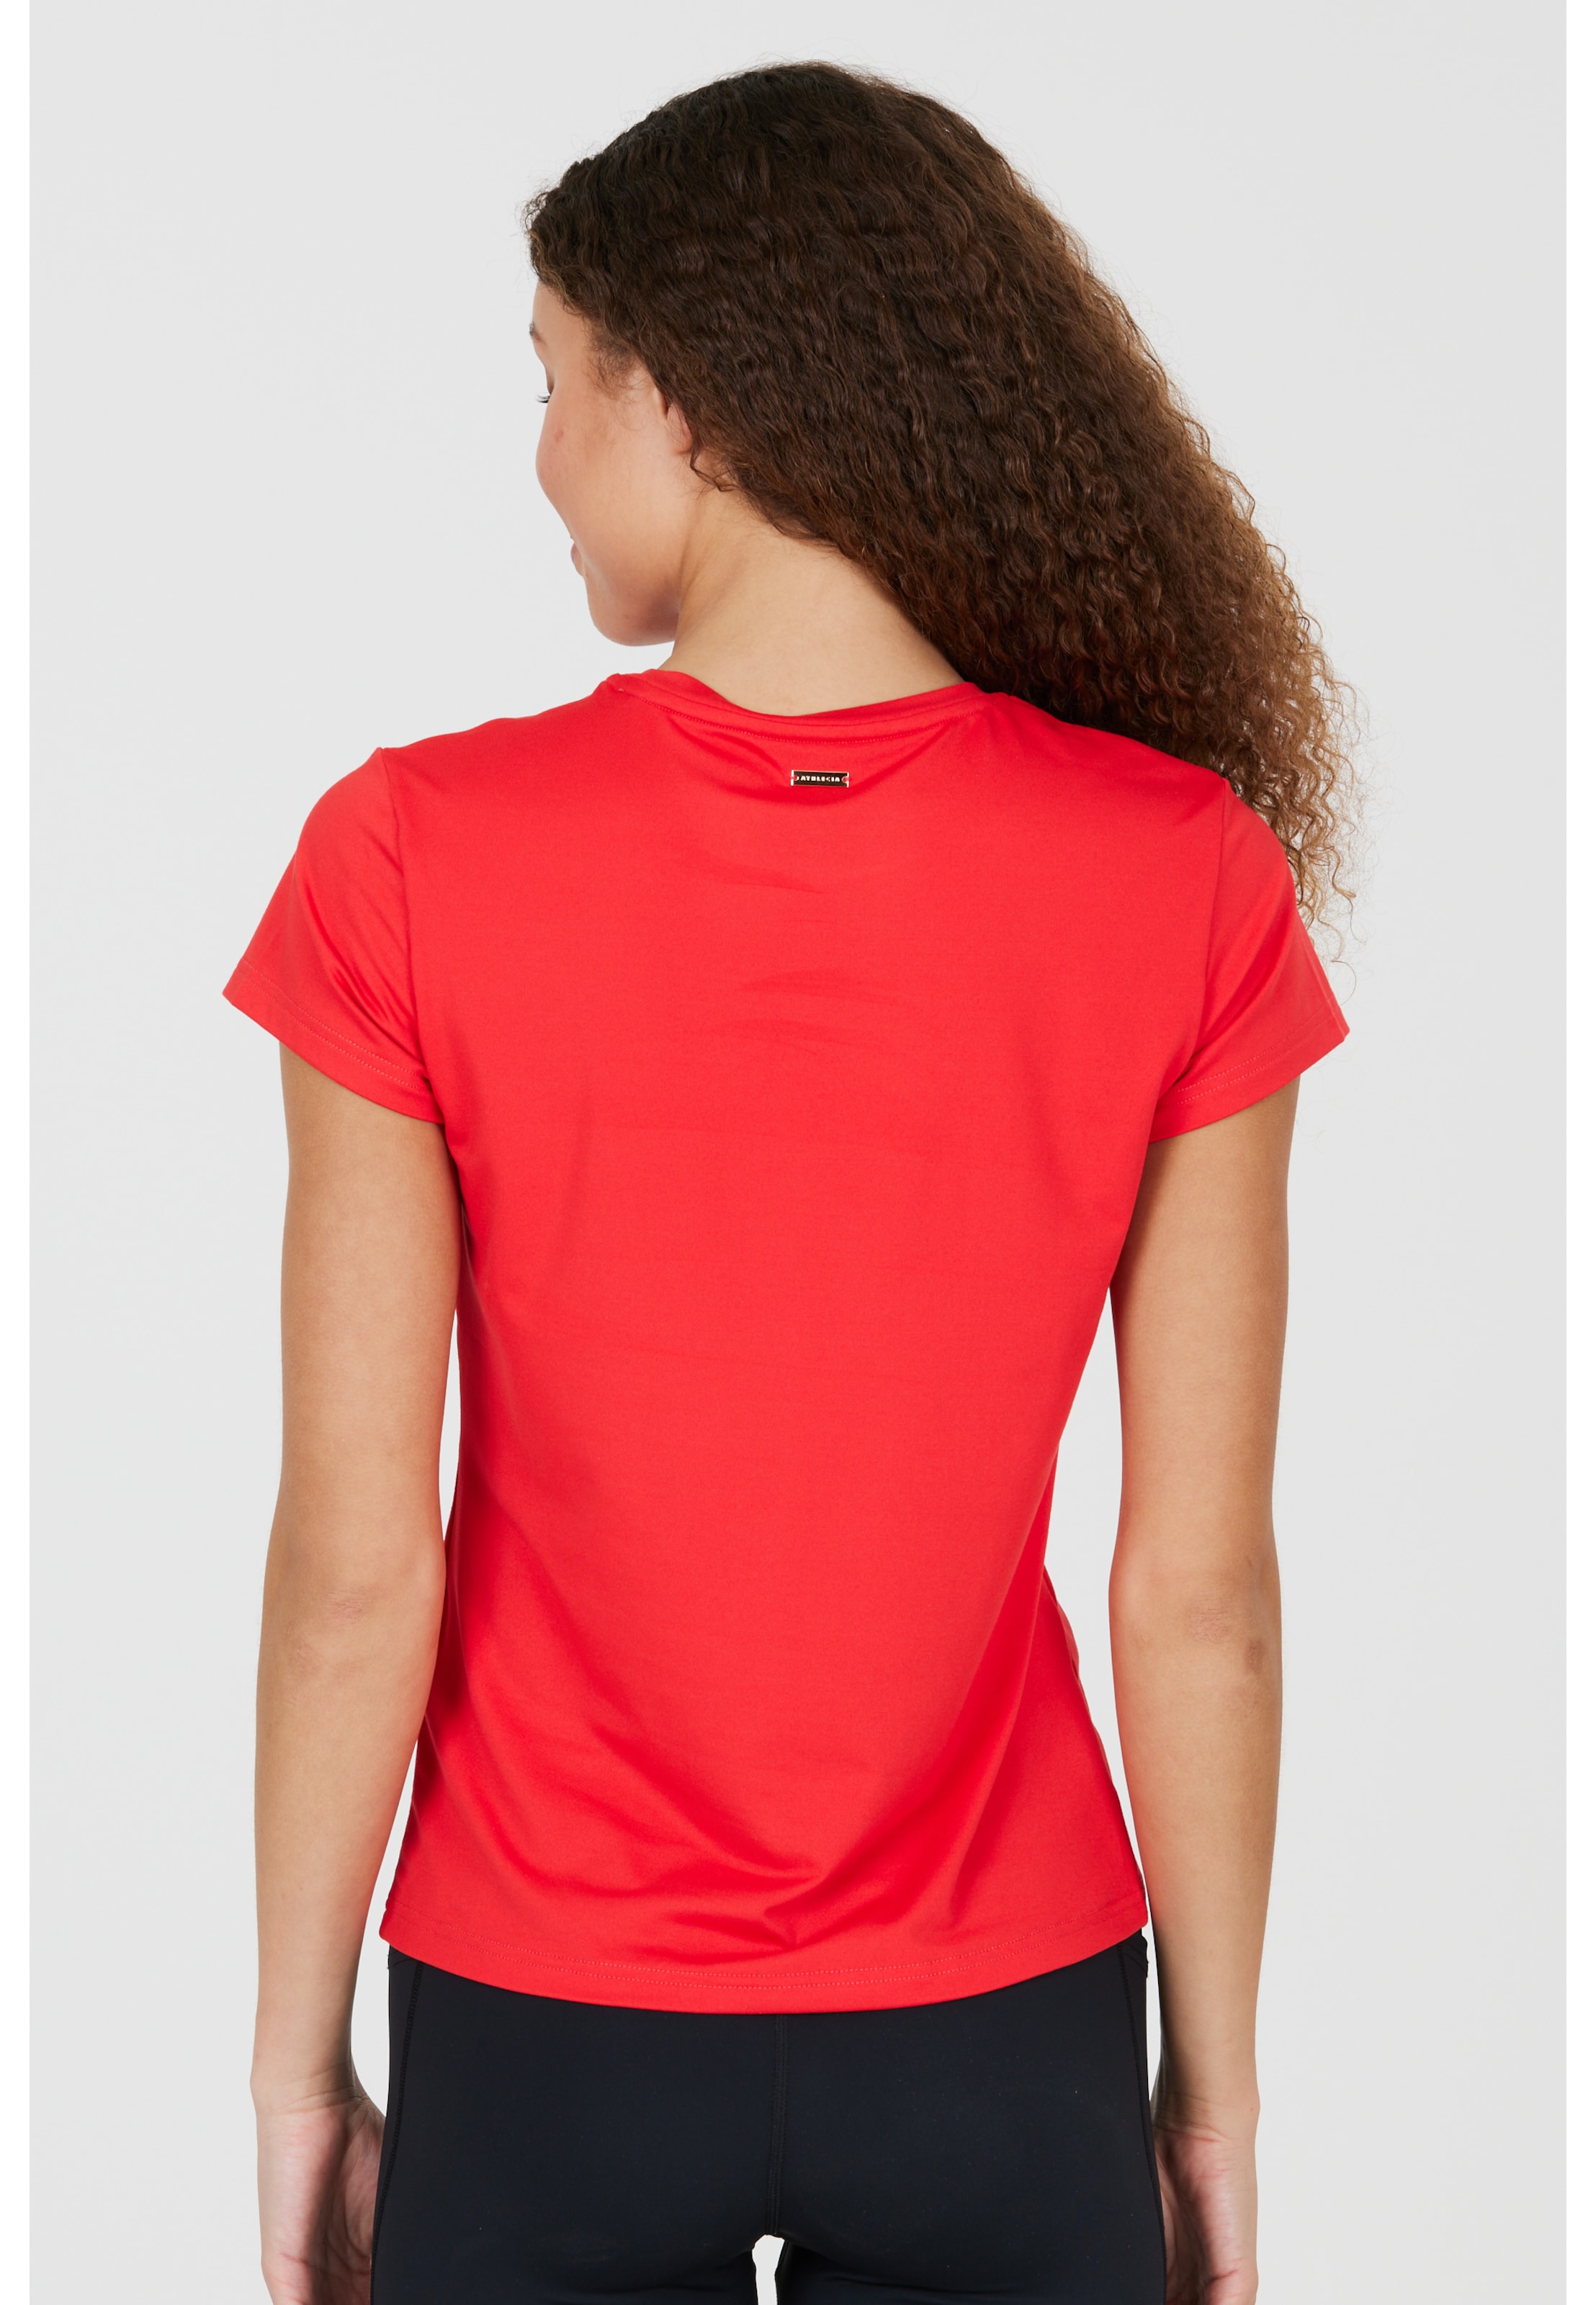 Athlecia Funktionsshirt 'Almi' in Orange | ABOUT YOU